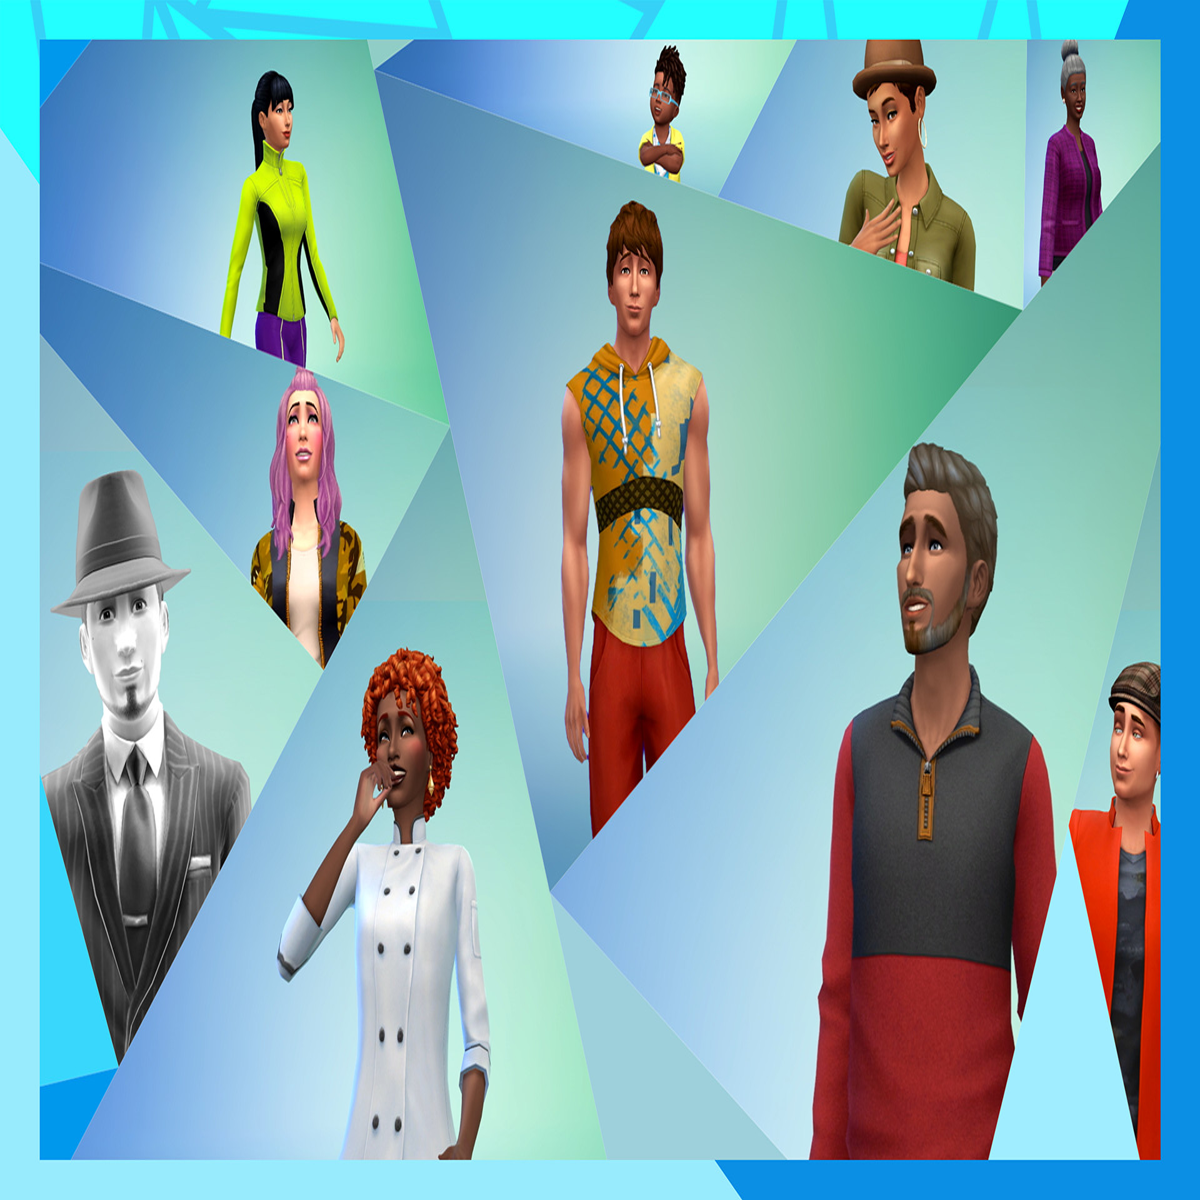 sims 4 expansion pack - Best Prices and Online Promos - Dec 2023